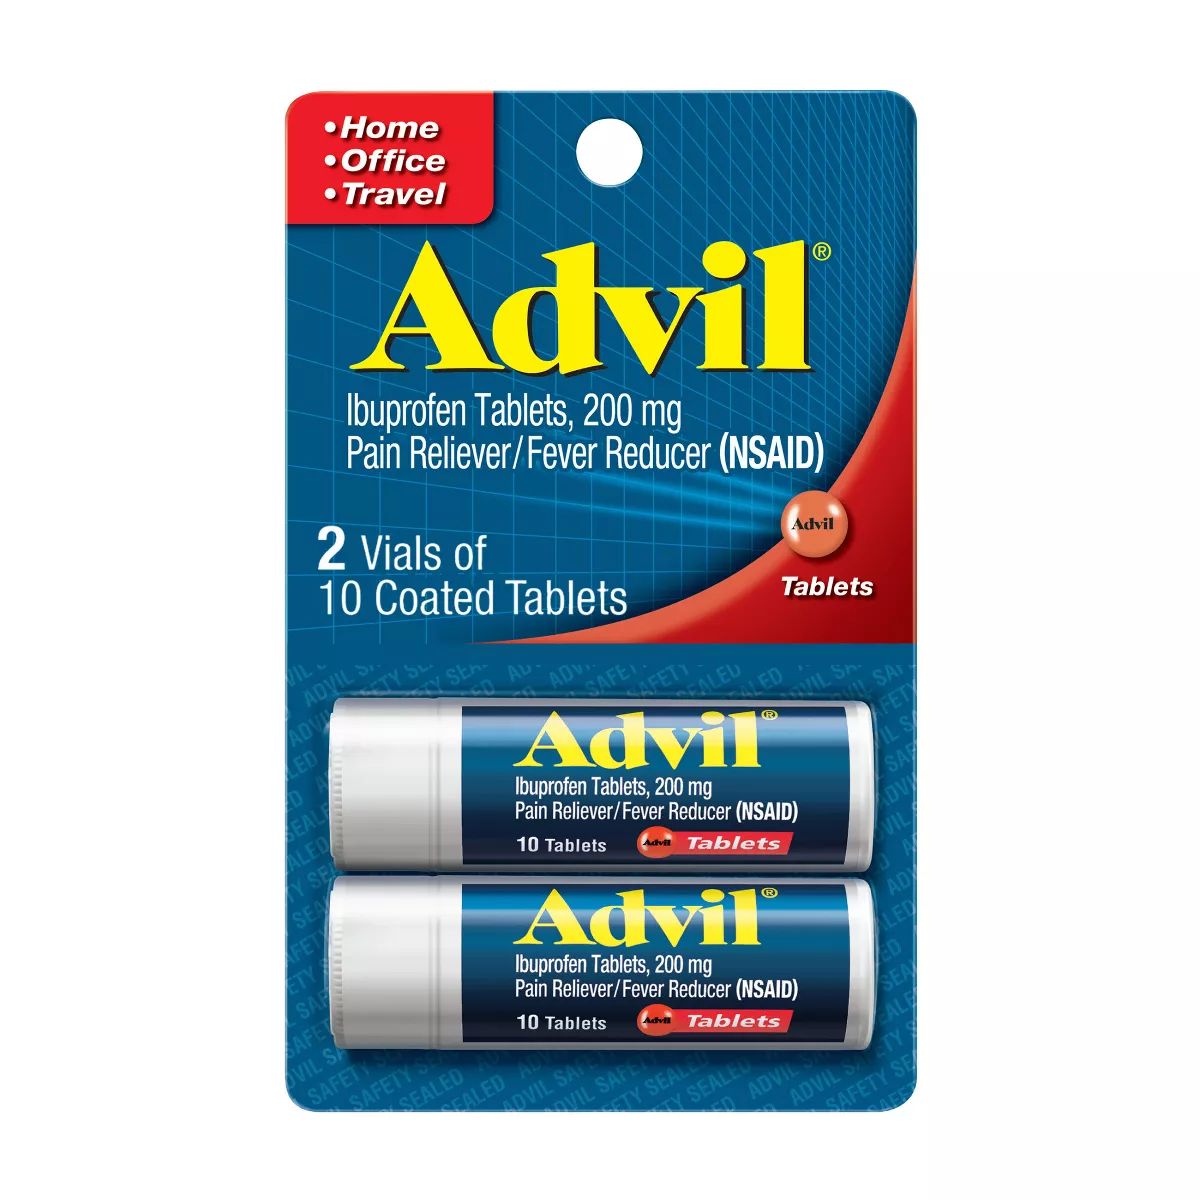 Advil Pain Reliever/Fever Reducer Tablets - Ibuprofen (NSAID) | Target